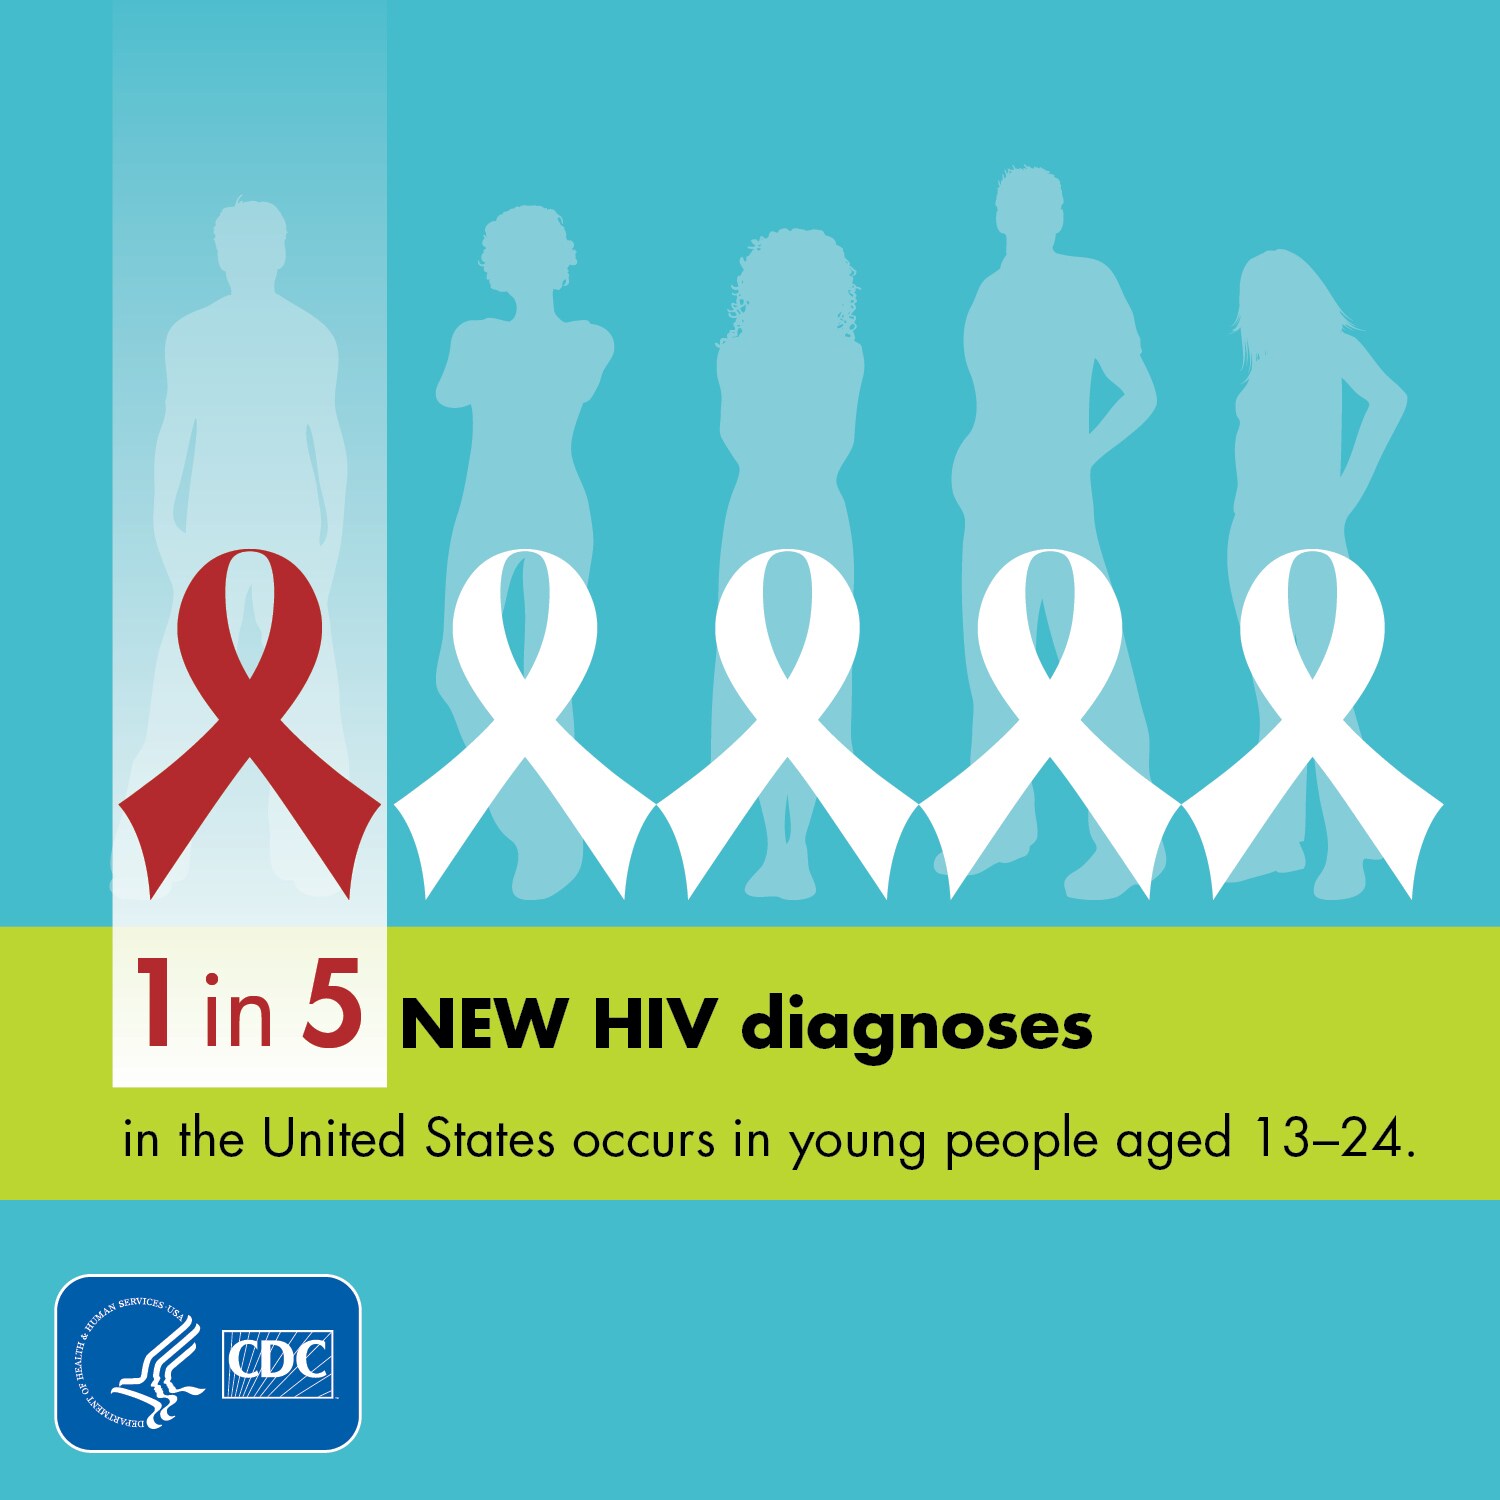 1 in 5 new HIV diagnoses occurs in young people ages 13-24.